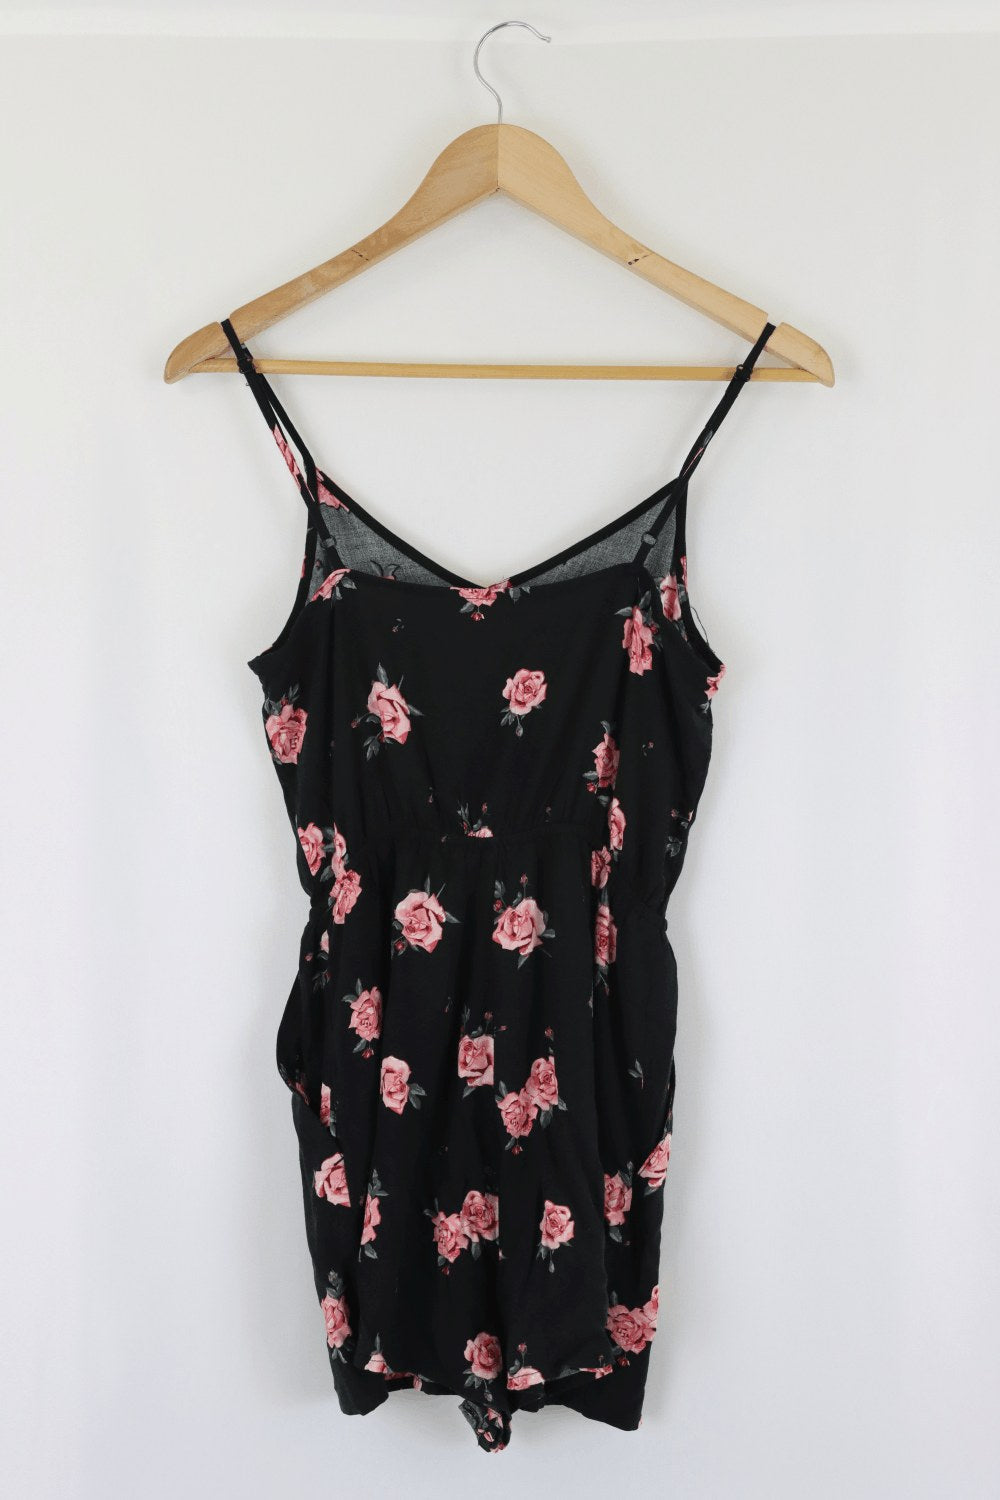 H&M Floral Black And White Jumpsuit 6